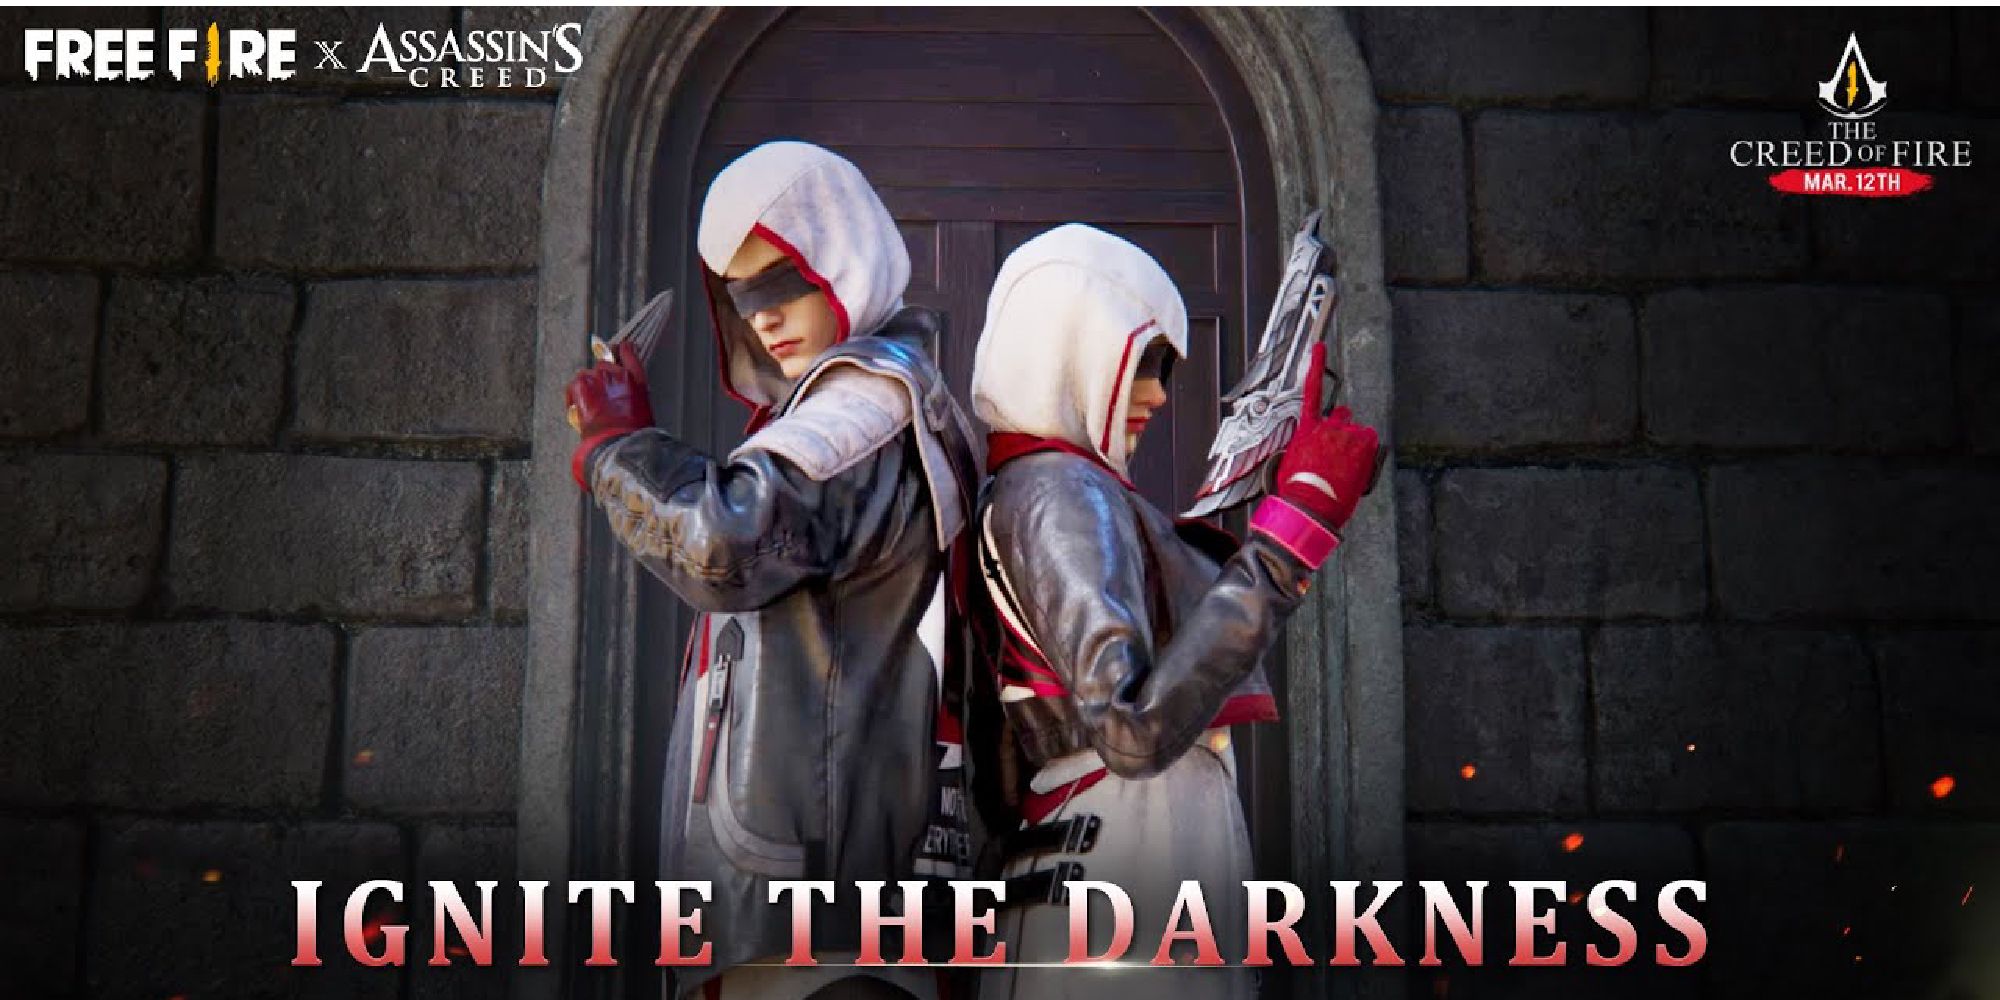 Two characters from Free Fire sporting Assassins Creed skins